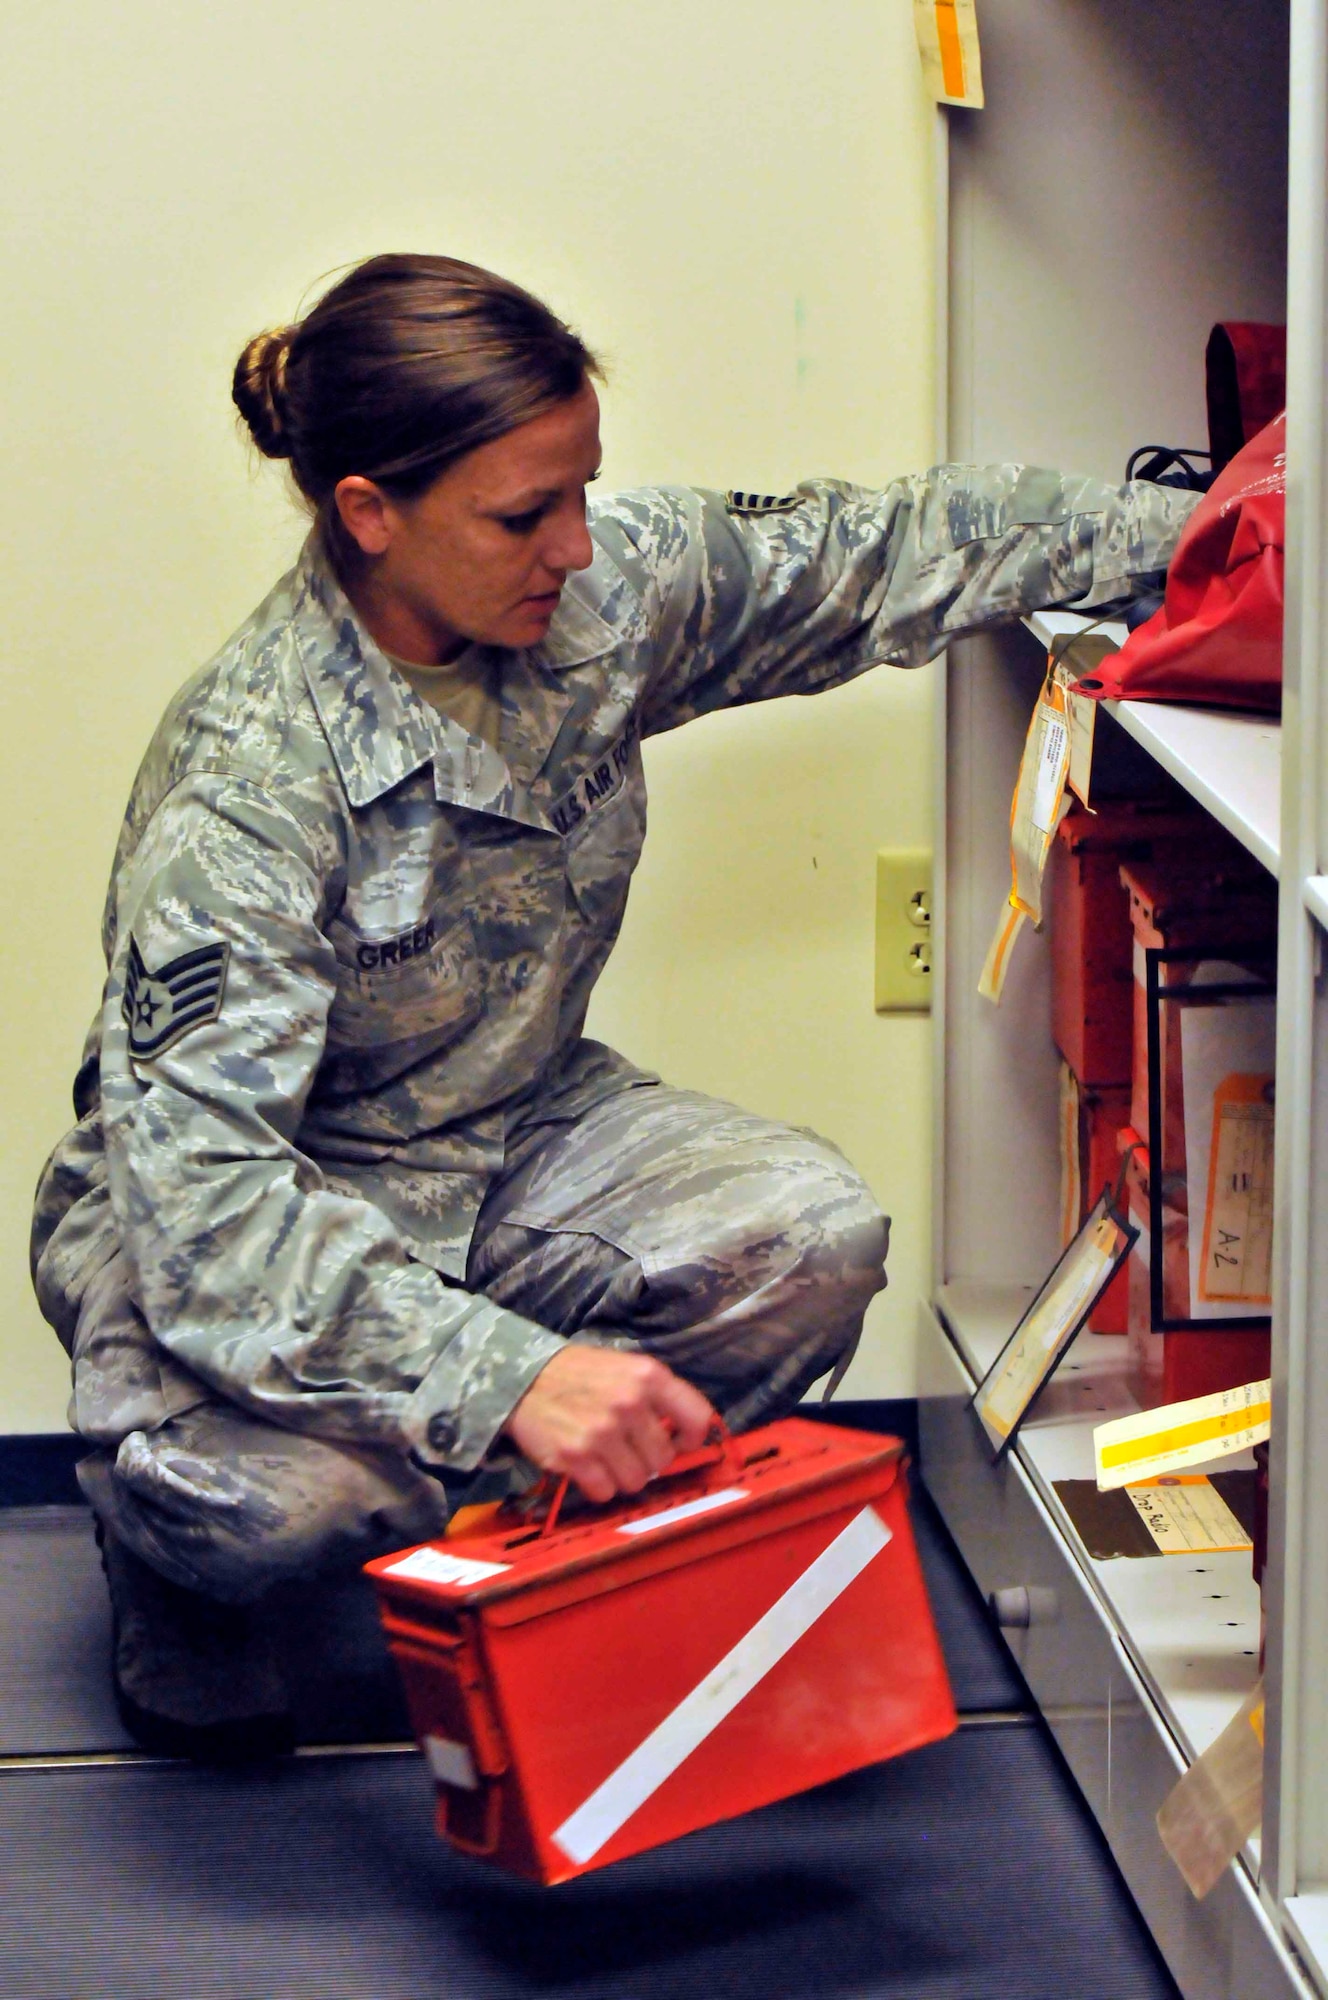 PATRICK AIR FORCE BASE, Fla. - Staff Sgt. Stacie Greer, aircrew flight equipment specialist, 920th Operations Support Squadron, switches out equipment during the post-flight checklist for the Cocoa Beach Air Show Nove 4-5. AFE specialists typically take about 30 minutes to prepare the life support gear for the next day following a flight. (U.S. Air Force Photo/Capt. Ryan Liss)